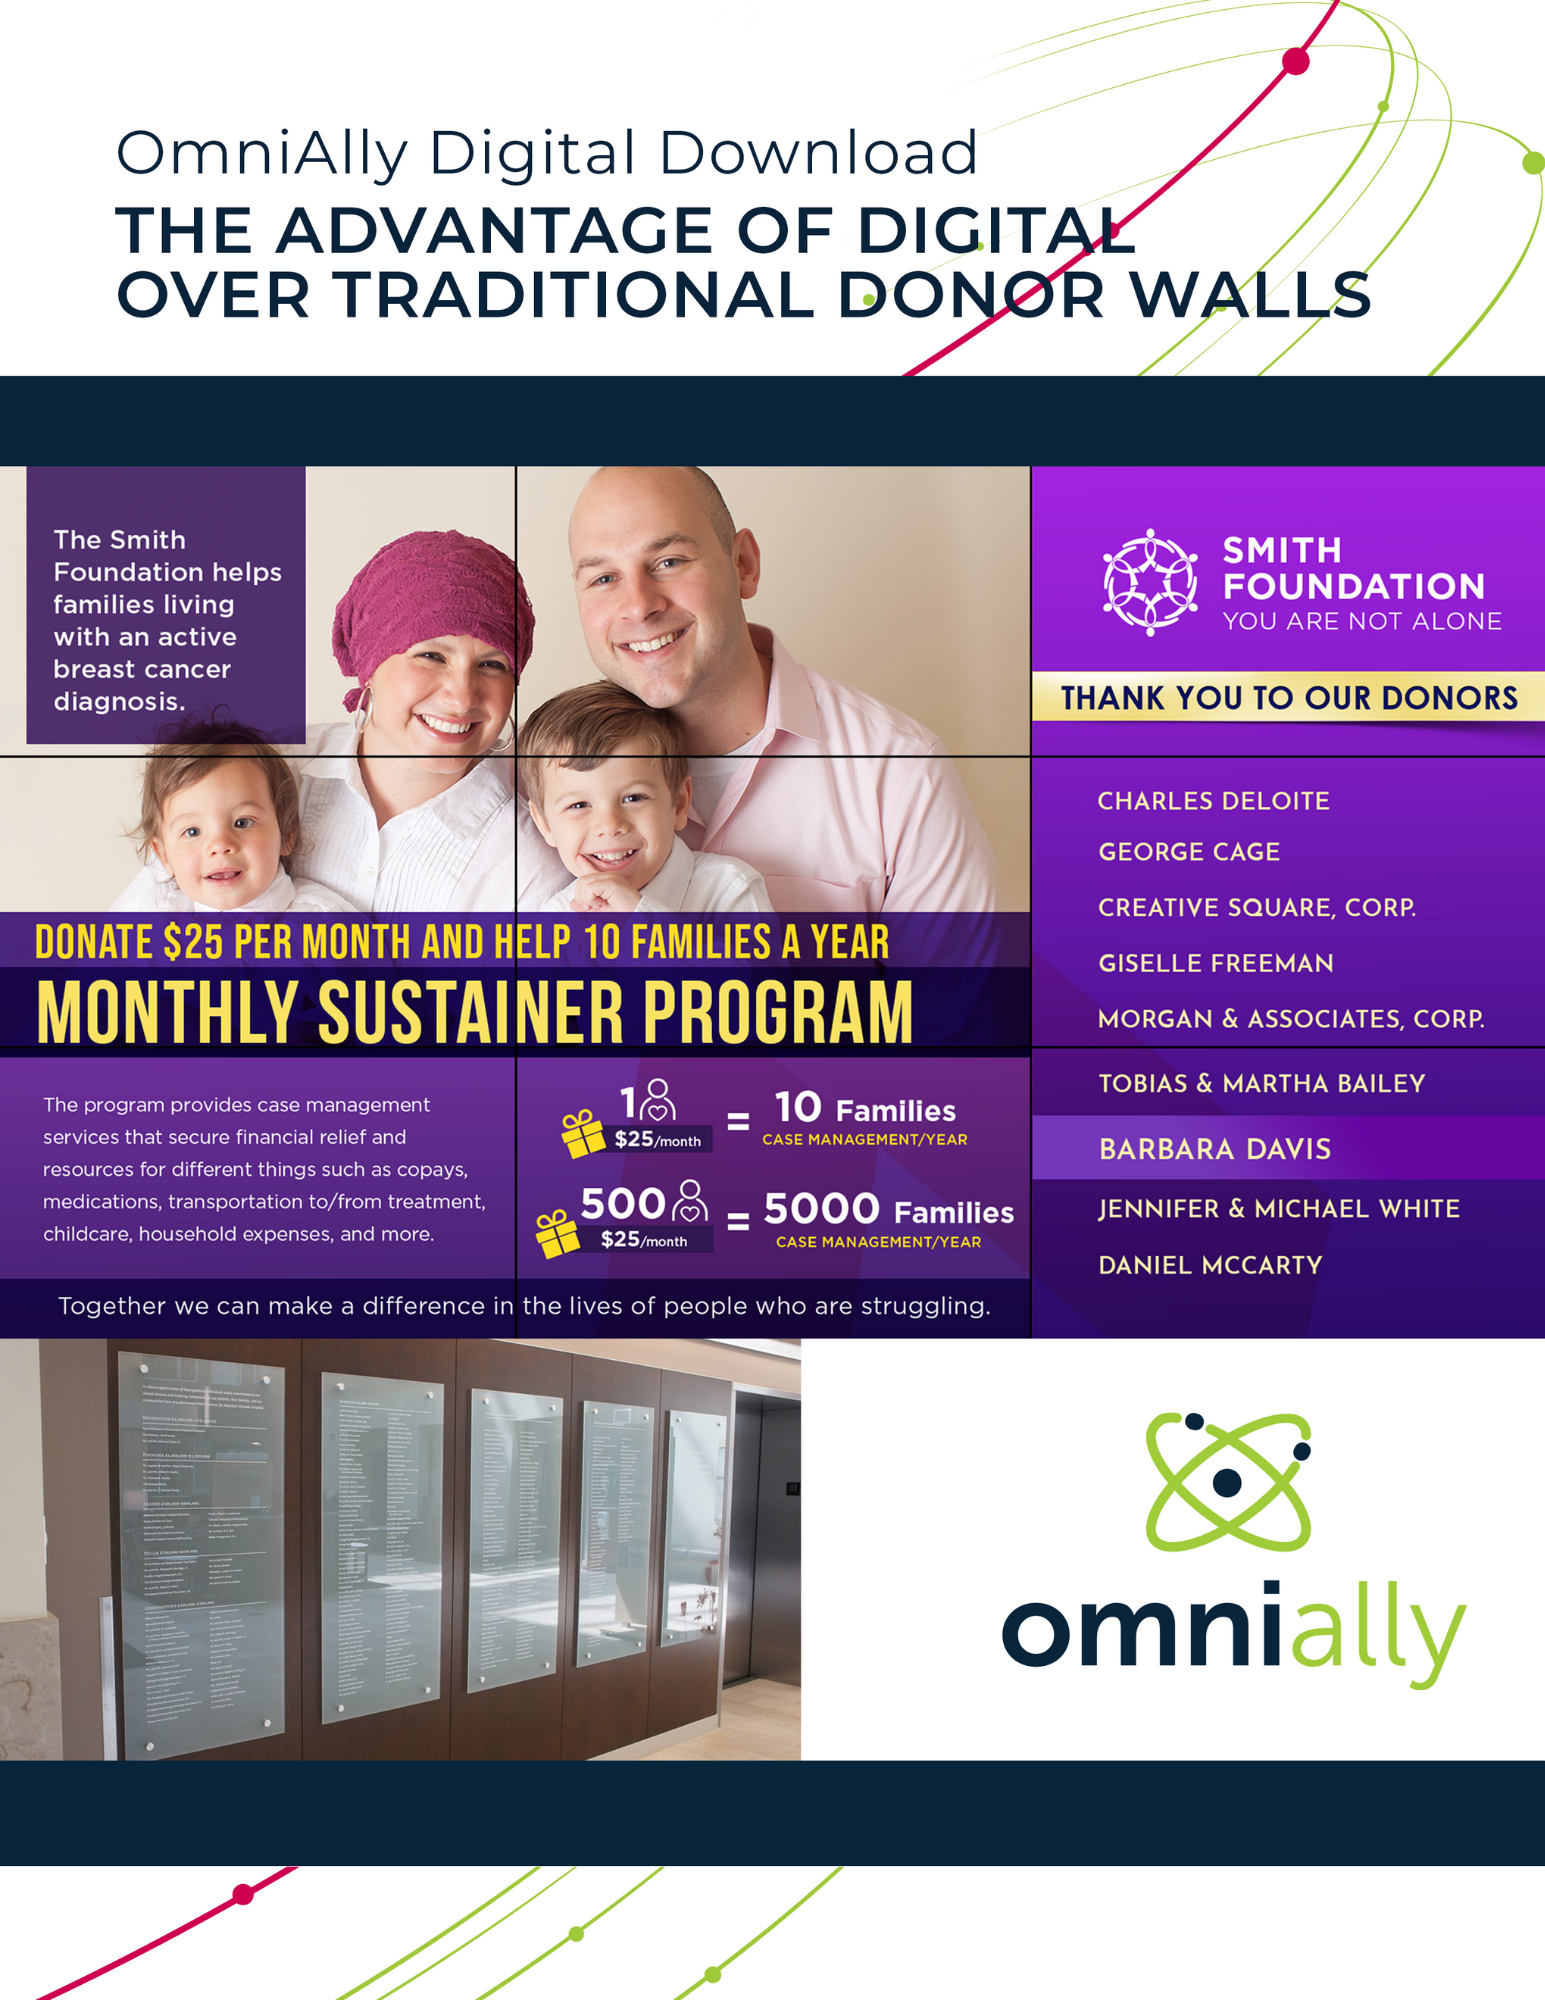 OmniAlly The Advantage of Digital over Traditional Donor Walls